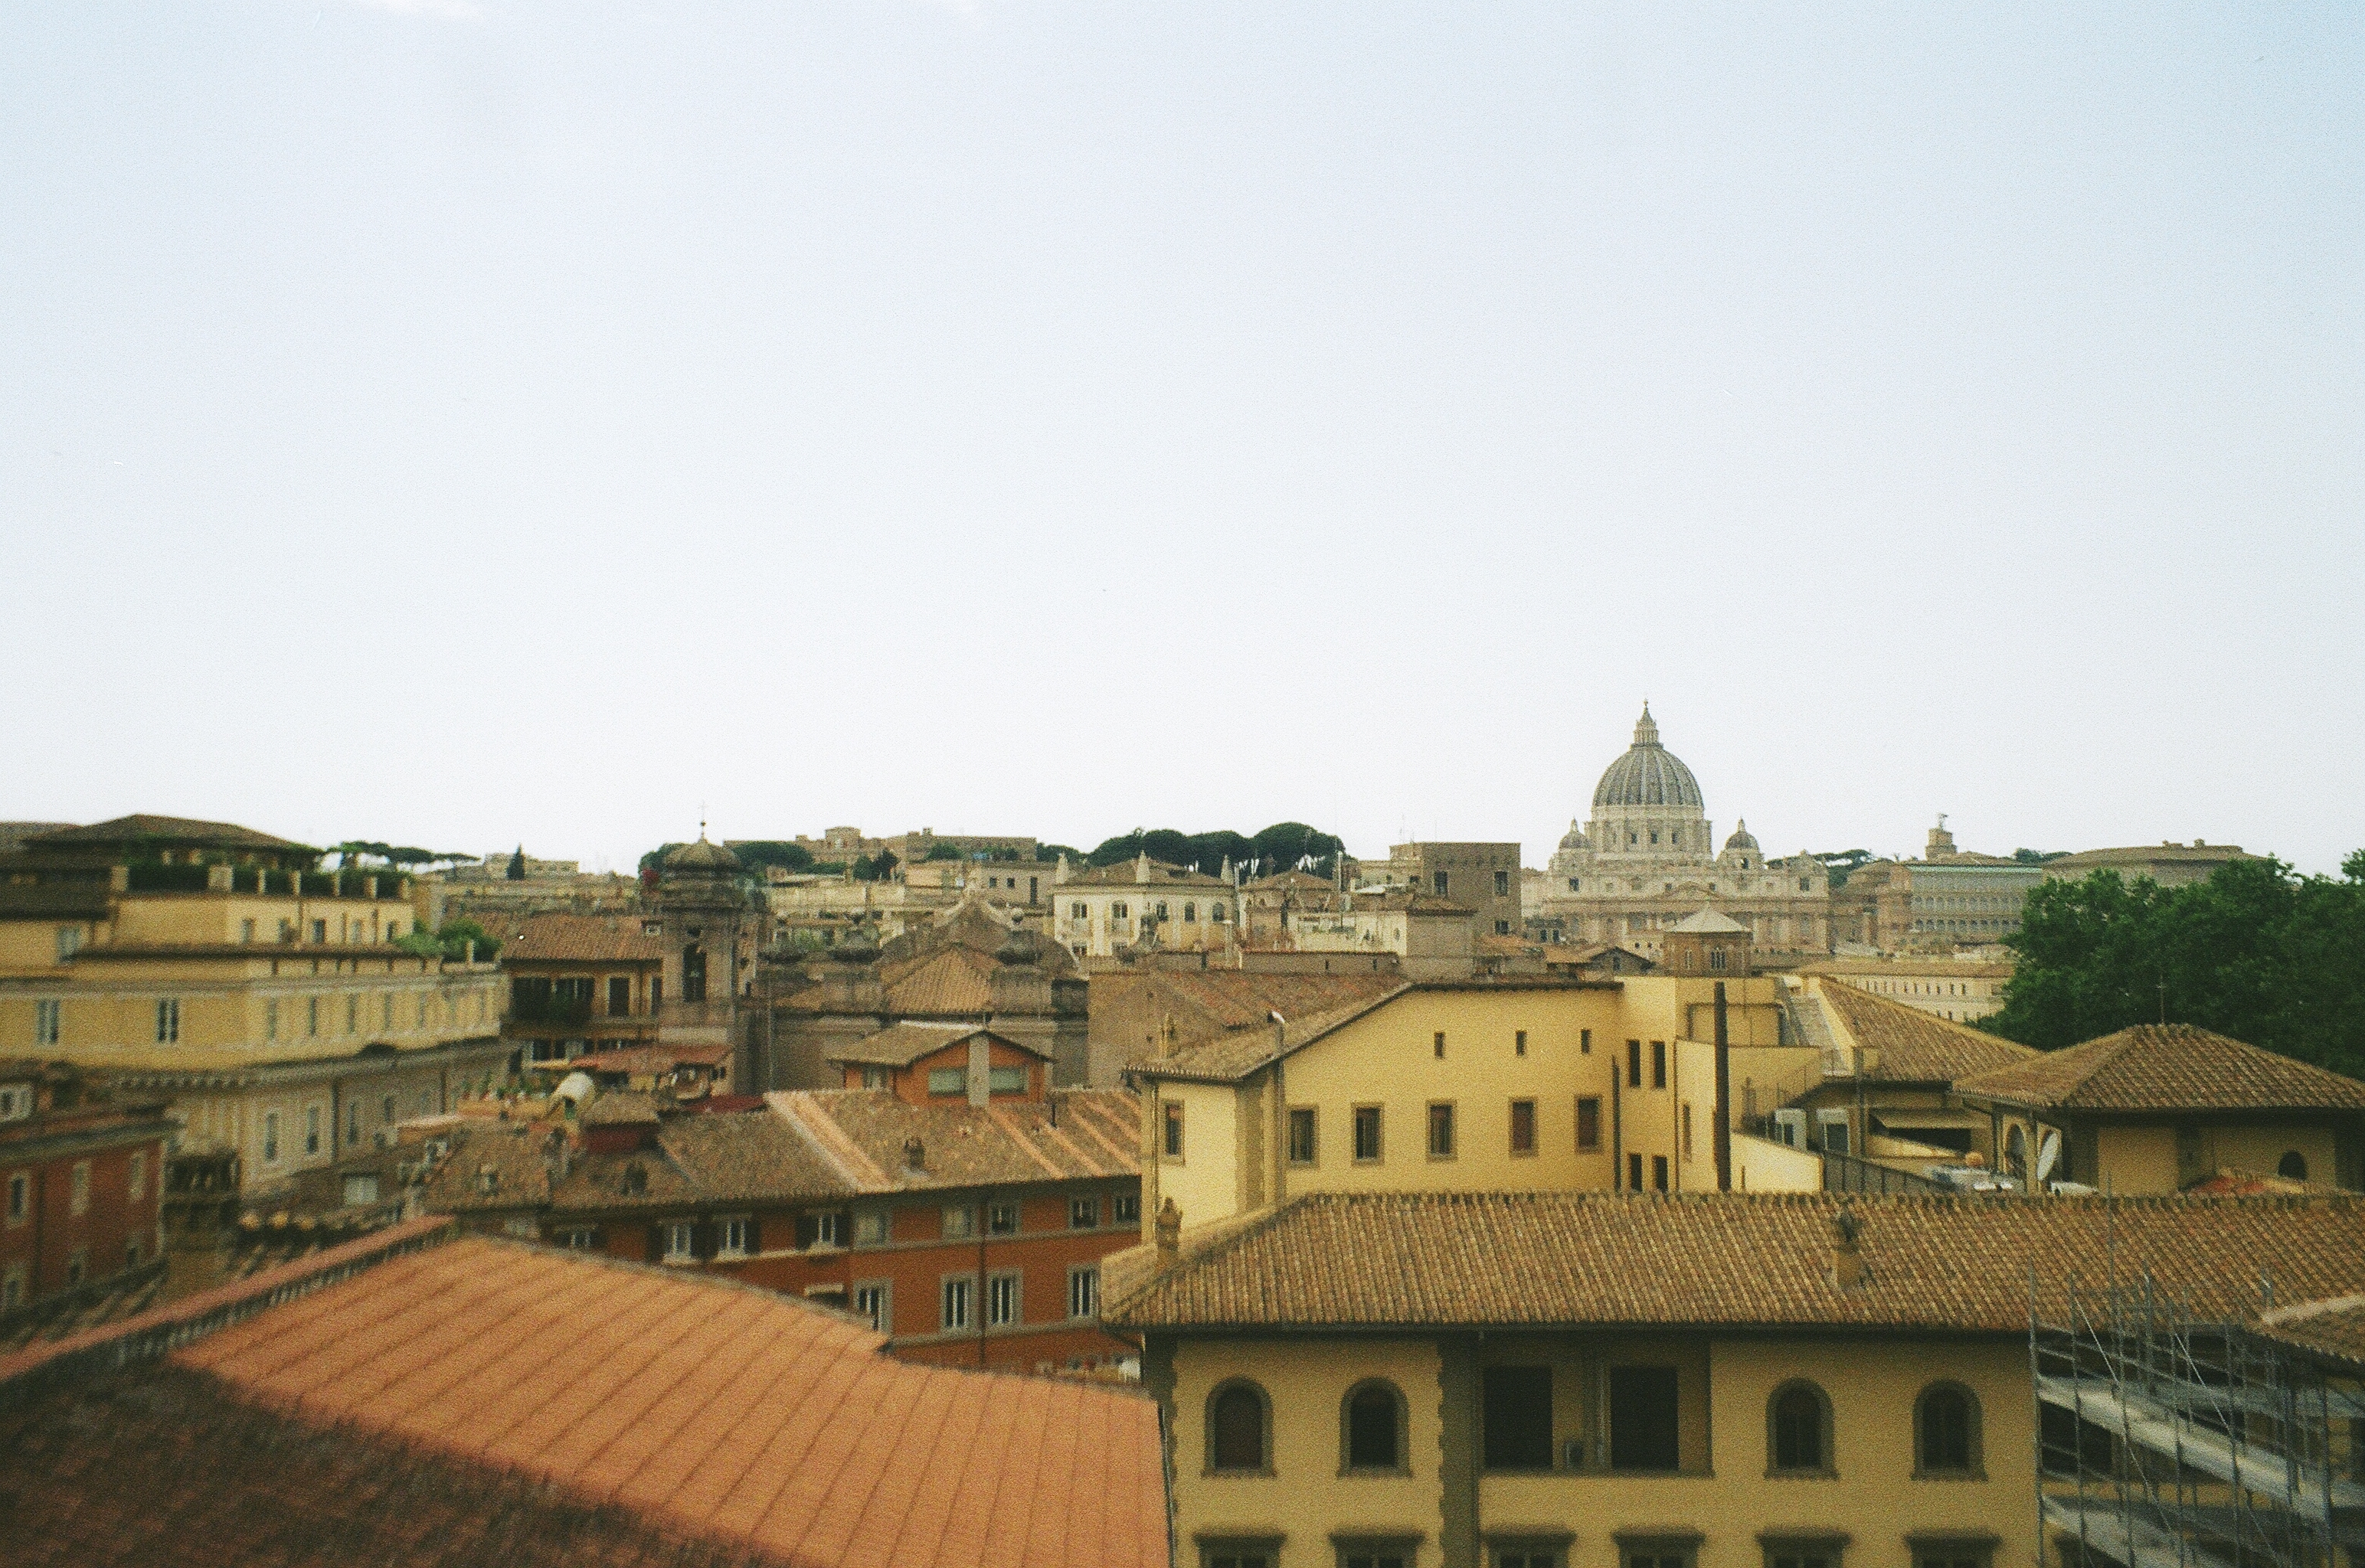 This image depicts the many different rooftops in Rome Italy. In the distance you can see the famous St.Peter's Basillica in Vatican City 